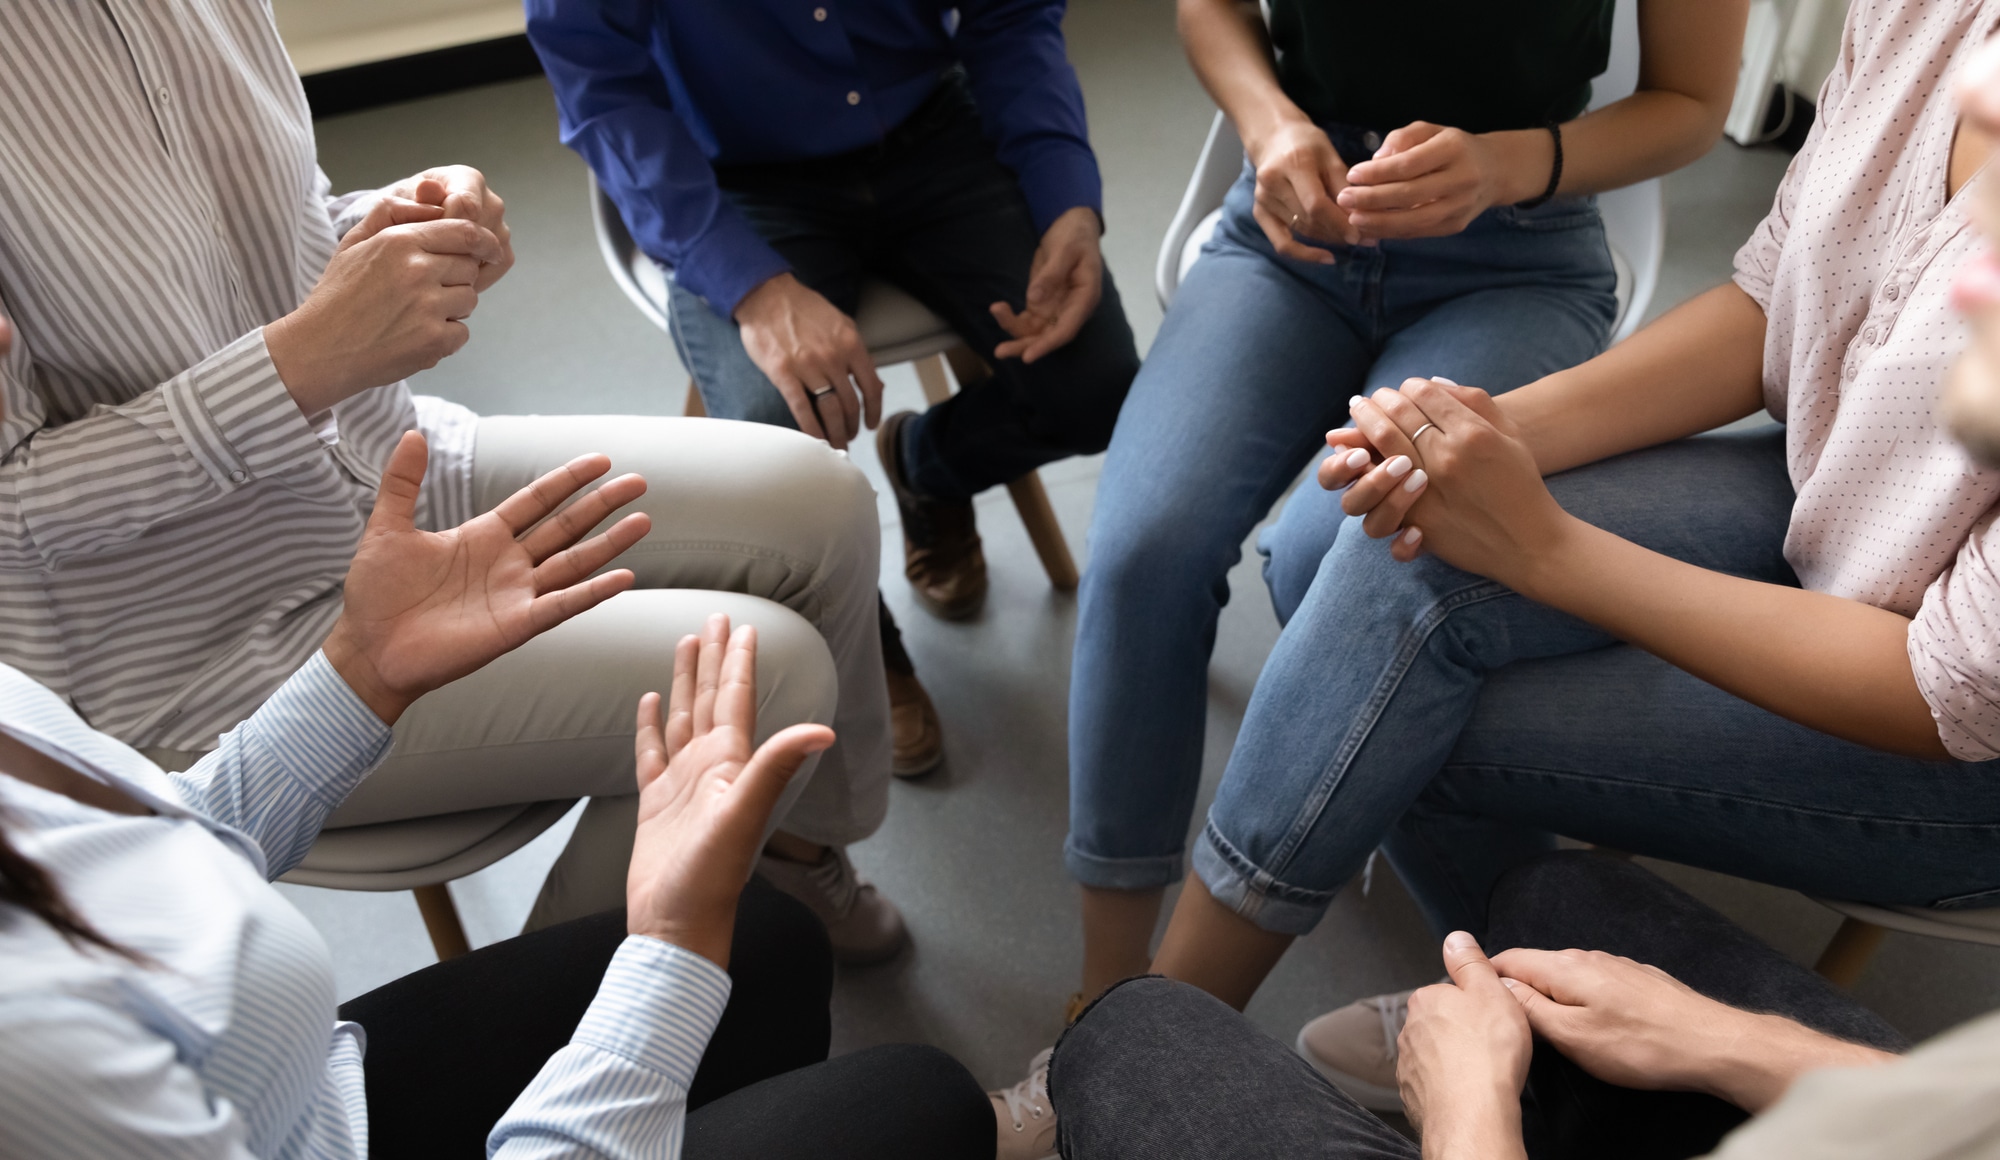 Drug Use and Addiction Among High Earning Professionals Pathfinders - A group of individuals in drug rehab show support for one another by discussing their stories, coping strategies, and treatment successes.